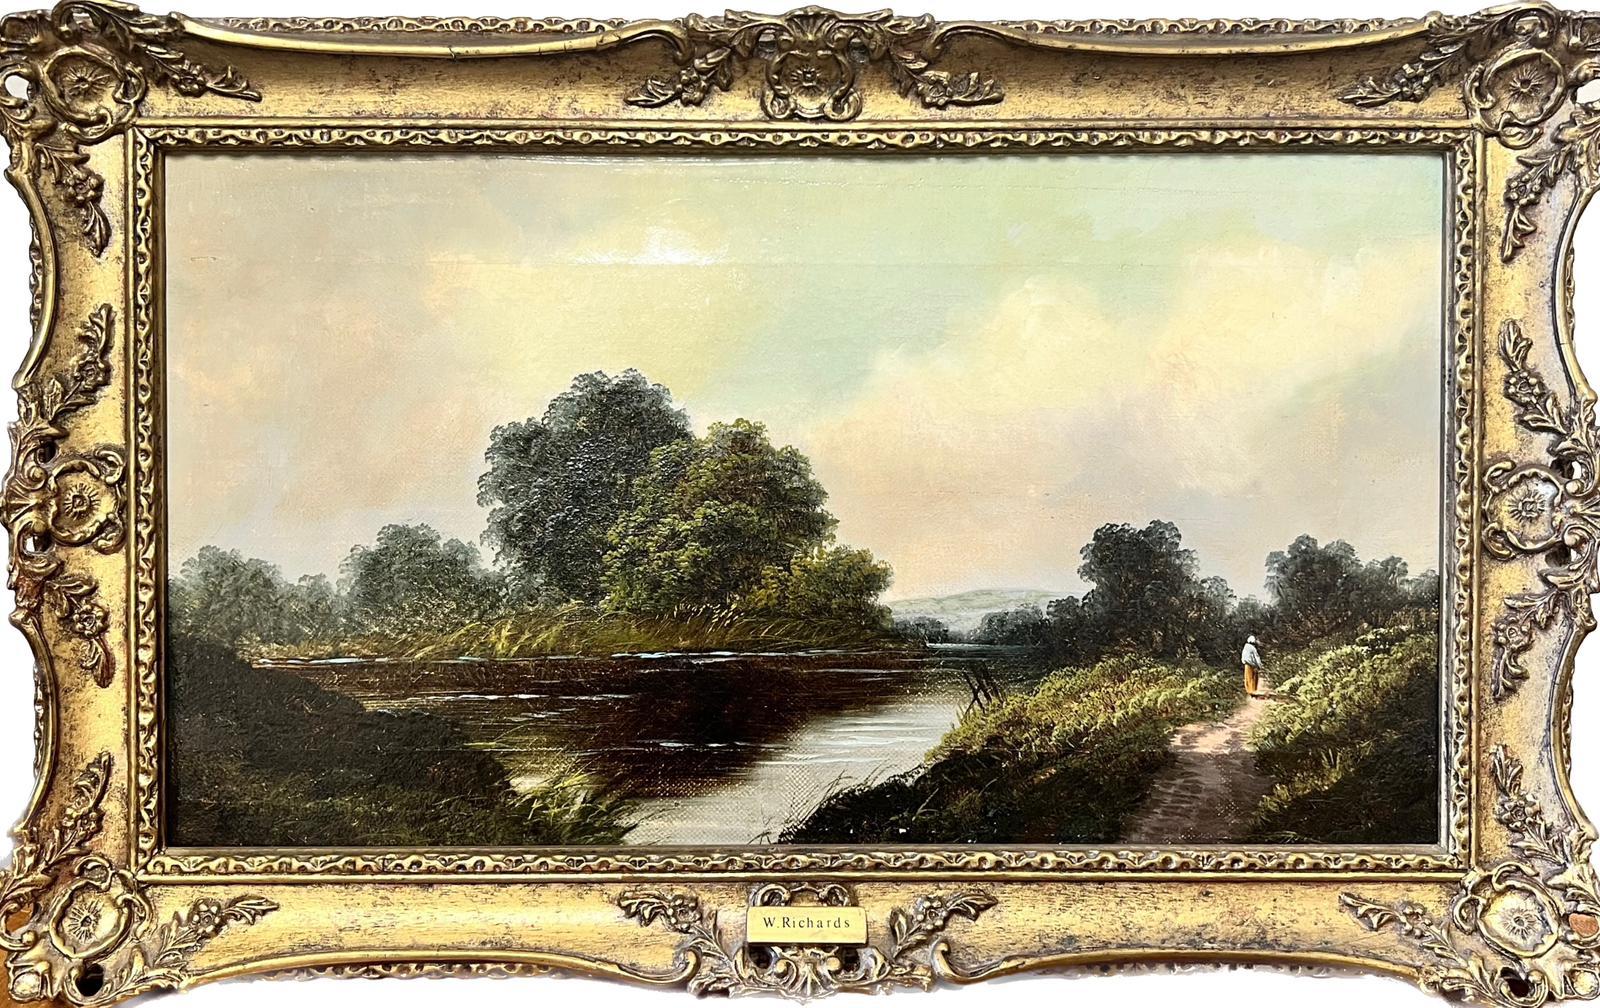 Victorian English Landscape Painting - Figure Walking Riverside Pathway in English Landscape, Victorian Oil Painting 